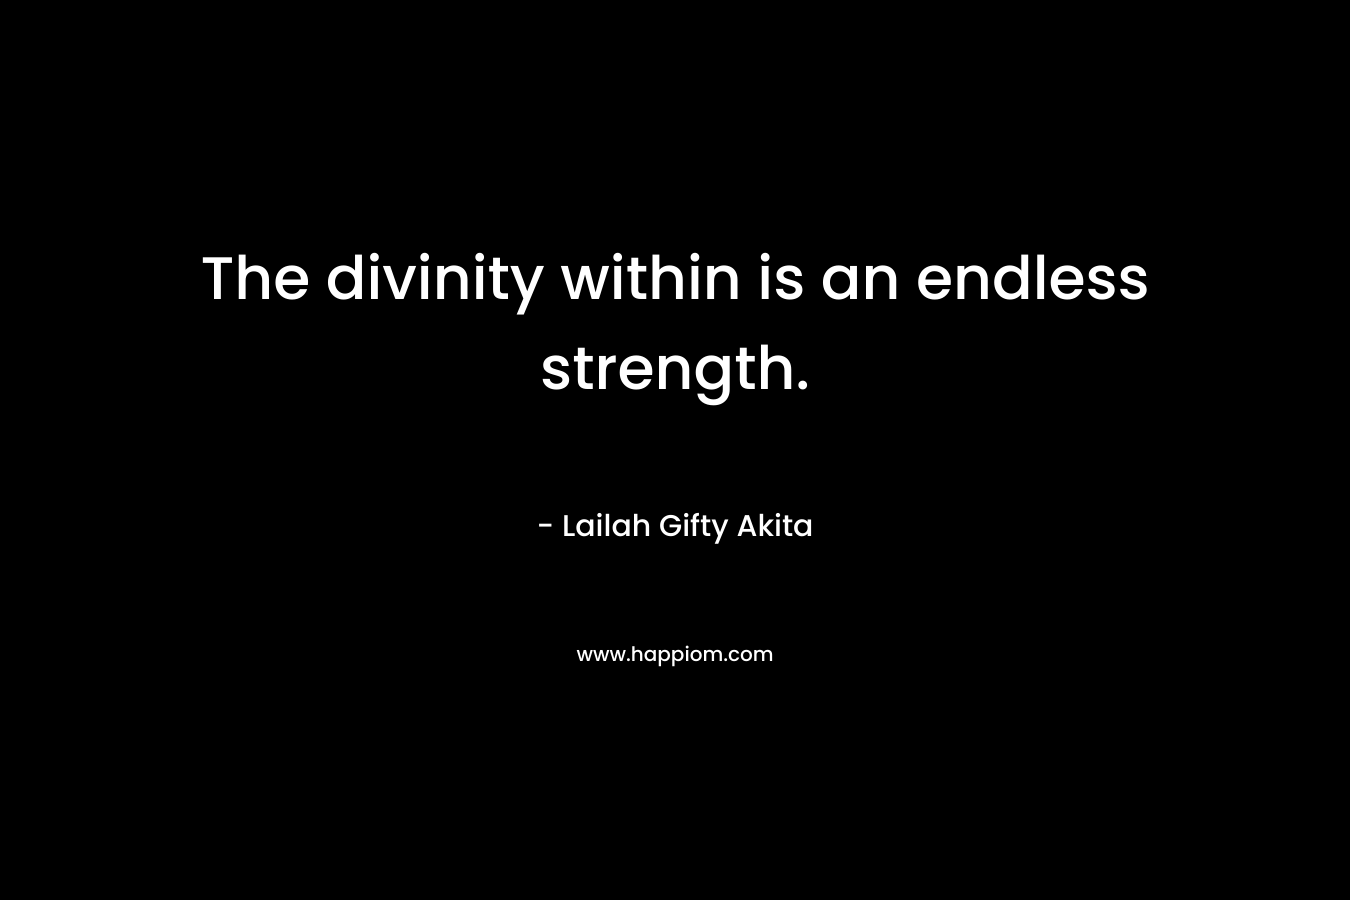 The divinity within is an endless strength.